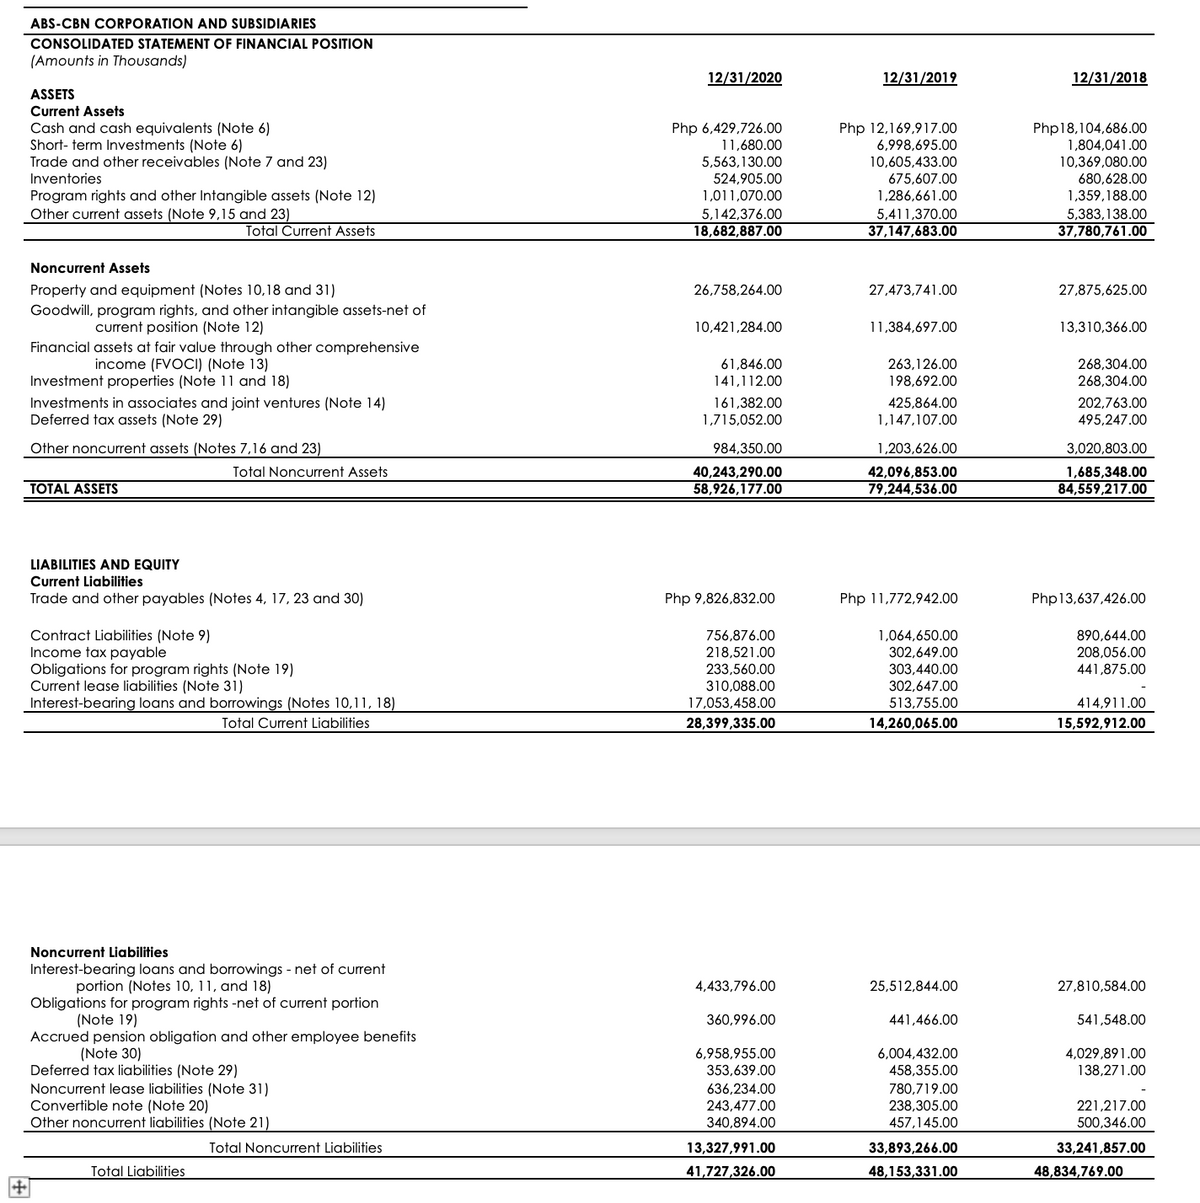 ABS-CBN CORPORATION AND SUBSIDIARIES
CONSOLIDATED STATEMENT OF FINANCIAL POSITION
(Amounts in Thousands)
12/31/2020
12/31/2019
12/31/2018
ASSETS
Current Assets
Cash and cash equivalents (Note 6)
Short- term Investments (Note 6)
Trade and other receivables (Note 7 and 23)
Php 6,429,726.00
11,680.00
Php 12,169,917.00
6,998,695.00
Php18,104,686.00
1,804,041.00
5,563,130.00
10,605,433.00
10,369,080.00
524,905.00
675,607.00
1,286,661.00
Inventories
680,628.00
Program rights and other Intangible assets (Note 12)
Other current assets (Note 9,15 and 23)
1,011,070.00
1,359,188.00
5,142,376.00
18,682,887.00
5,383,138.00
37,780,761.00
5,411,370.00
Total Current Assets
37,147,683.00
Noncurrent Assets
Property and equipment (Notes 10,18 and 31)
26,758,264.00
27,473,741.00
27,875,625.00
Goodwill, program rights, and other intangible assets-net of
current position (Note 12)
10,421,284.00
11,384,697.00
13,310,366.00
Financial assets at fair value through other comprehensive
income (FVOCI) (Note 13)
61,846.00
263,126.00
268,304.00
Investment properties (Note 11 and 18)
Investments in associates and joint ventures (Note 14)
Deferred tax assets (Note 29)
141,112.00
198,692.00
268,304.00
161,382.00
425,864.00
202,763.00
1,715,052.00
1,147,107.00
495,247.00
Other noncurrent assets (Notes 7,16 and 23)
984,350.00
1,203,626.00
3,020,803.00
40,243,290.00
58,926,177.00
Total Noncurrent Assets
42,096,853.00
79,244,536.00
1,685,348.00
84,559,217.00
TOTAL ASSETS
LIABILITIES AND EQUITY
Current Liabilities
Trade and other payables (Notes 4, 17, 23 and 30)
Php 9,826,832.00
Php 11,772,942.00
Php13,637,426.00
756,876.00
Contract Liabilities (Note 9)
Income tax payable
Obligations for program rights (Note 19)
Current lease liabilities (Note 31)
Interest-bearing loans and borrowings (Notes 10,11, 18)
1,064,650.00
890,644.00
218,521.00
302,649.00
208,056.00
303,440.00
302,647.00
513,755.00
233,560.00
441,875.00
310,088.00
17,053,458.00
414,911.00
Total Current Liabilities
28,399,335.00
14,260,065.00
15,592,912.00
Noncurrent Liabilities
Interest-bearing loans and borrowings - net of current
portion (Notes 10, 11, and 18)
4,433,796.00
25,512,844.00
27,810,584.00
Obligations for program rights -net of current portion
(Note 19)
360,996.00
441,466.00
541,548.00
Accrued pension obligation and other employee benefits
(Note 30)
Deferred tax liabilities (Note 29)
Noncurrent lease liabilities (Note 31)
Convertible note (Note 20)
Other noncurrent liabilities (Note 21)
6,958,955.00
4,029,891.00
138,271.00
6,004,432.00
353,639.00
458,355.00
636,234.00
780,719.00
221,217.00
500,346.00
243,477.00
238,305.00
340,894.00
457,145.00
Total Noncurrent Liabilities
13,327,991.00
33,893,266.00
33,241,857.00
Total Liabilities
41,727,326.00
48,153,331.00
48,834,769.00
